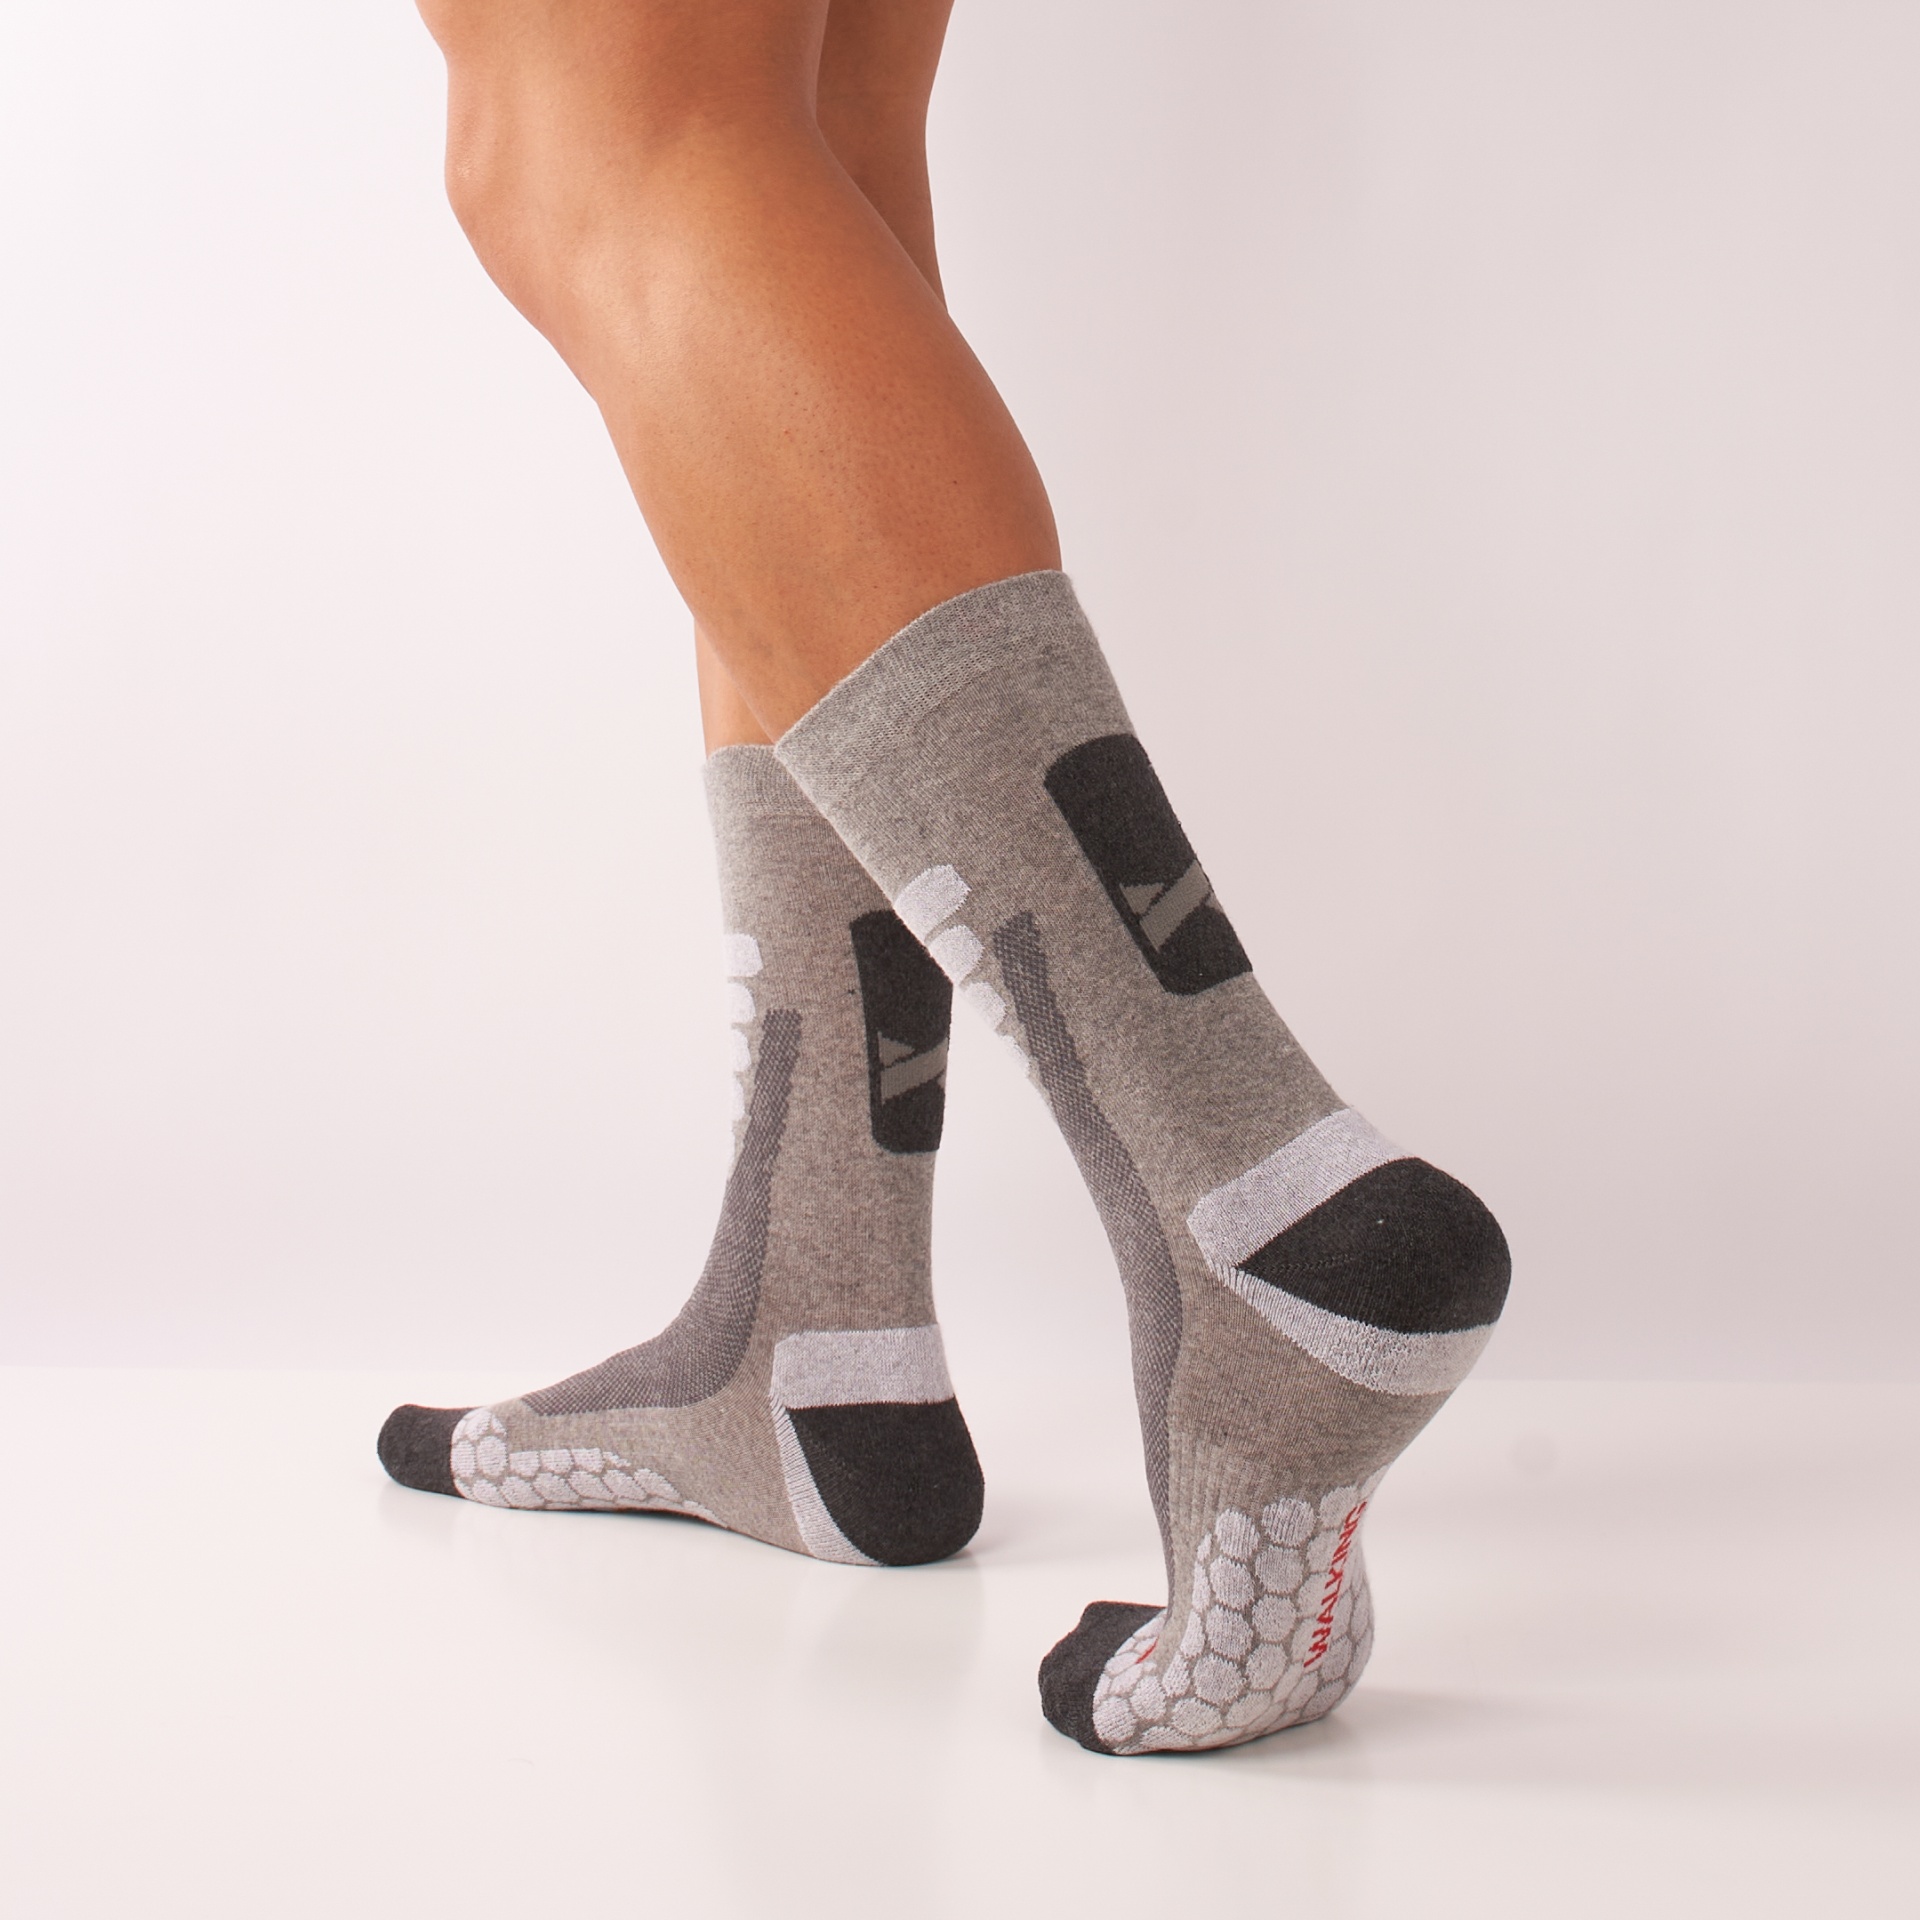 Calcetines  Xtreme Sockswear Technical Senderismo - Gris - Paquete 6 Pares  MKP